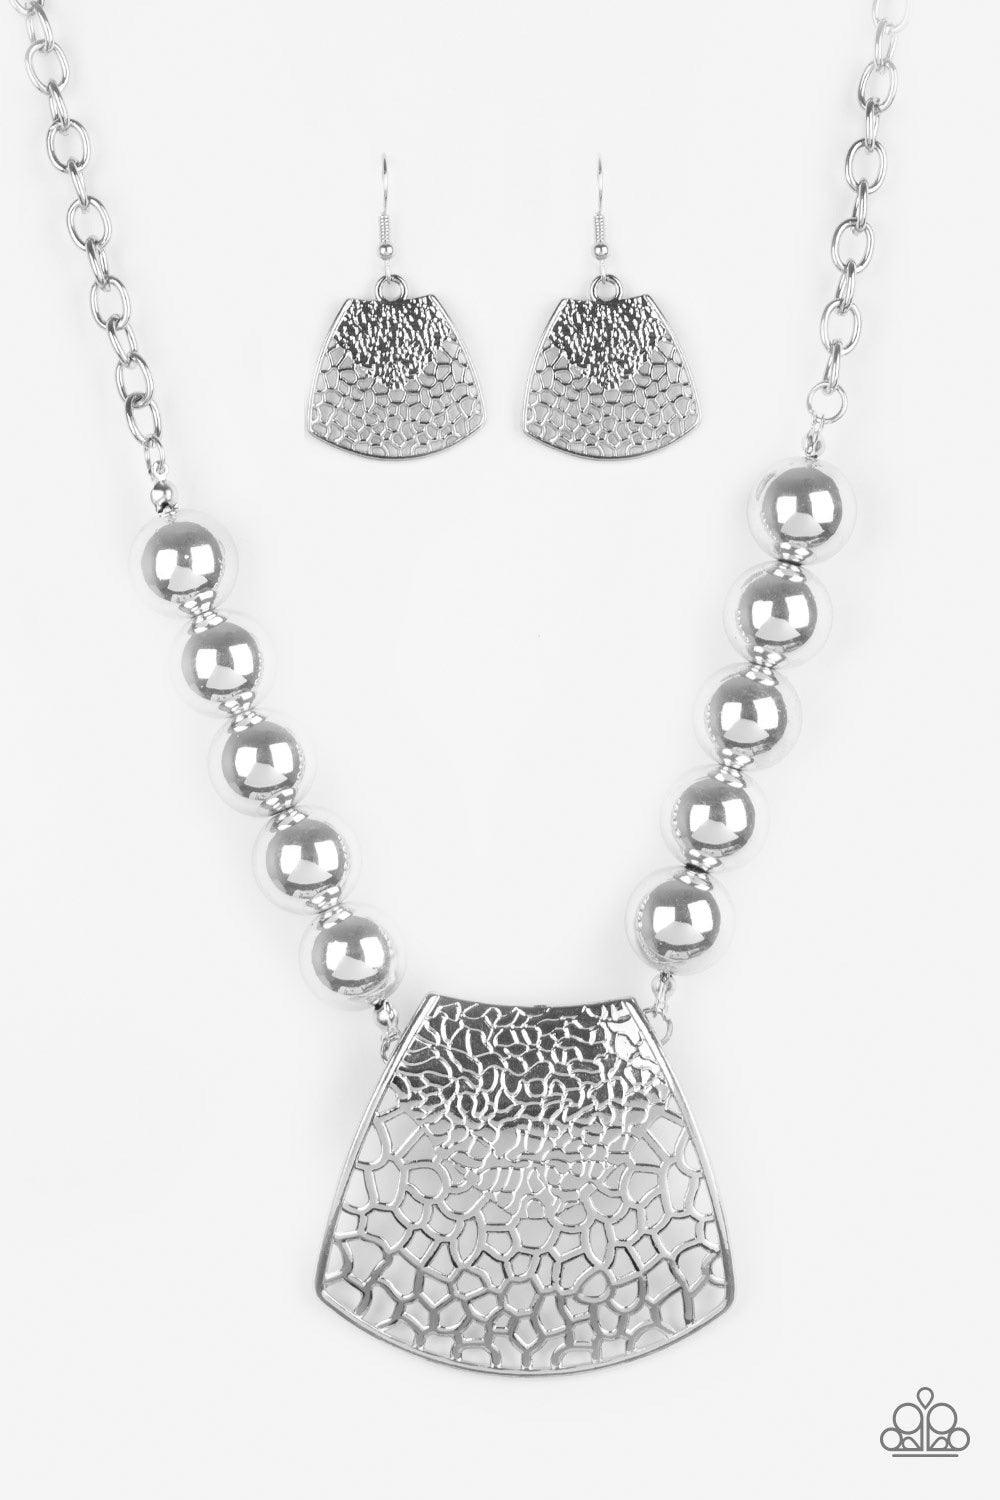 Paparazzi Accessories Large And In Charge - Silver Featuring ornately stenciled and embossed details, a flared silver plate swings from a boldly silver beaded chain below the collar for a fierce look. Features an adjustable clasp closure. Jewelry